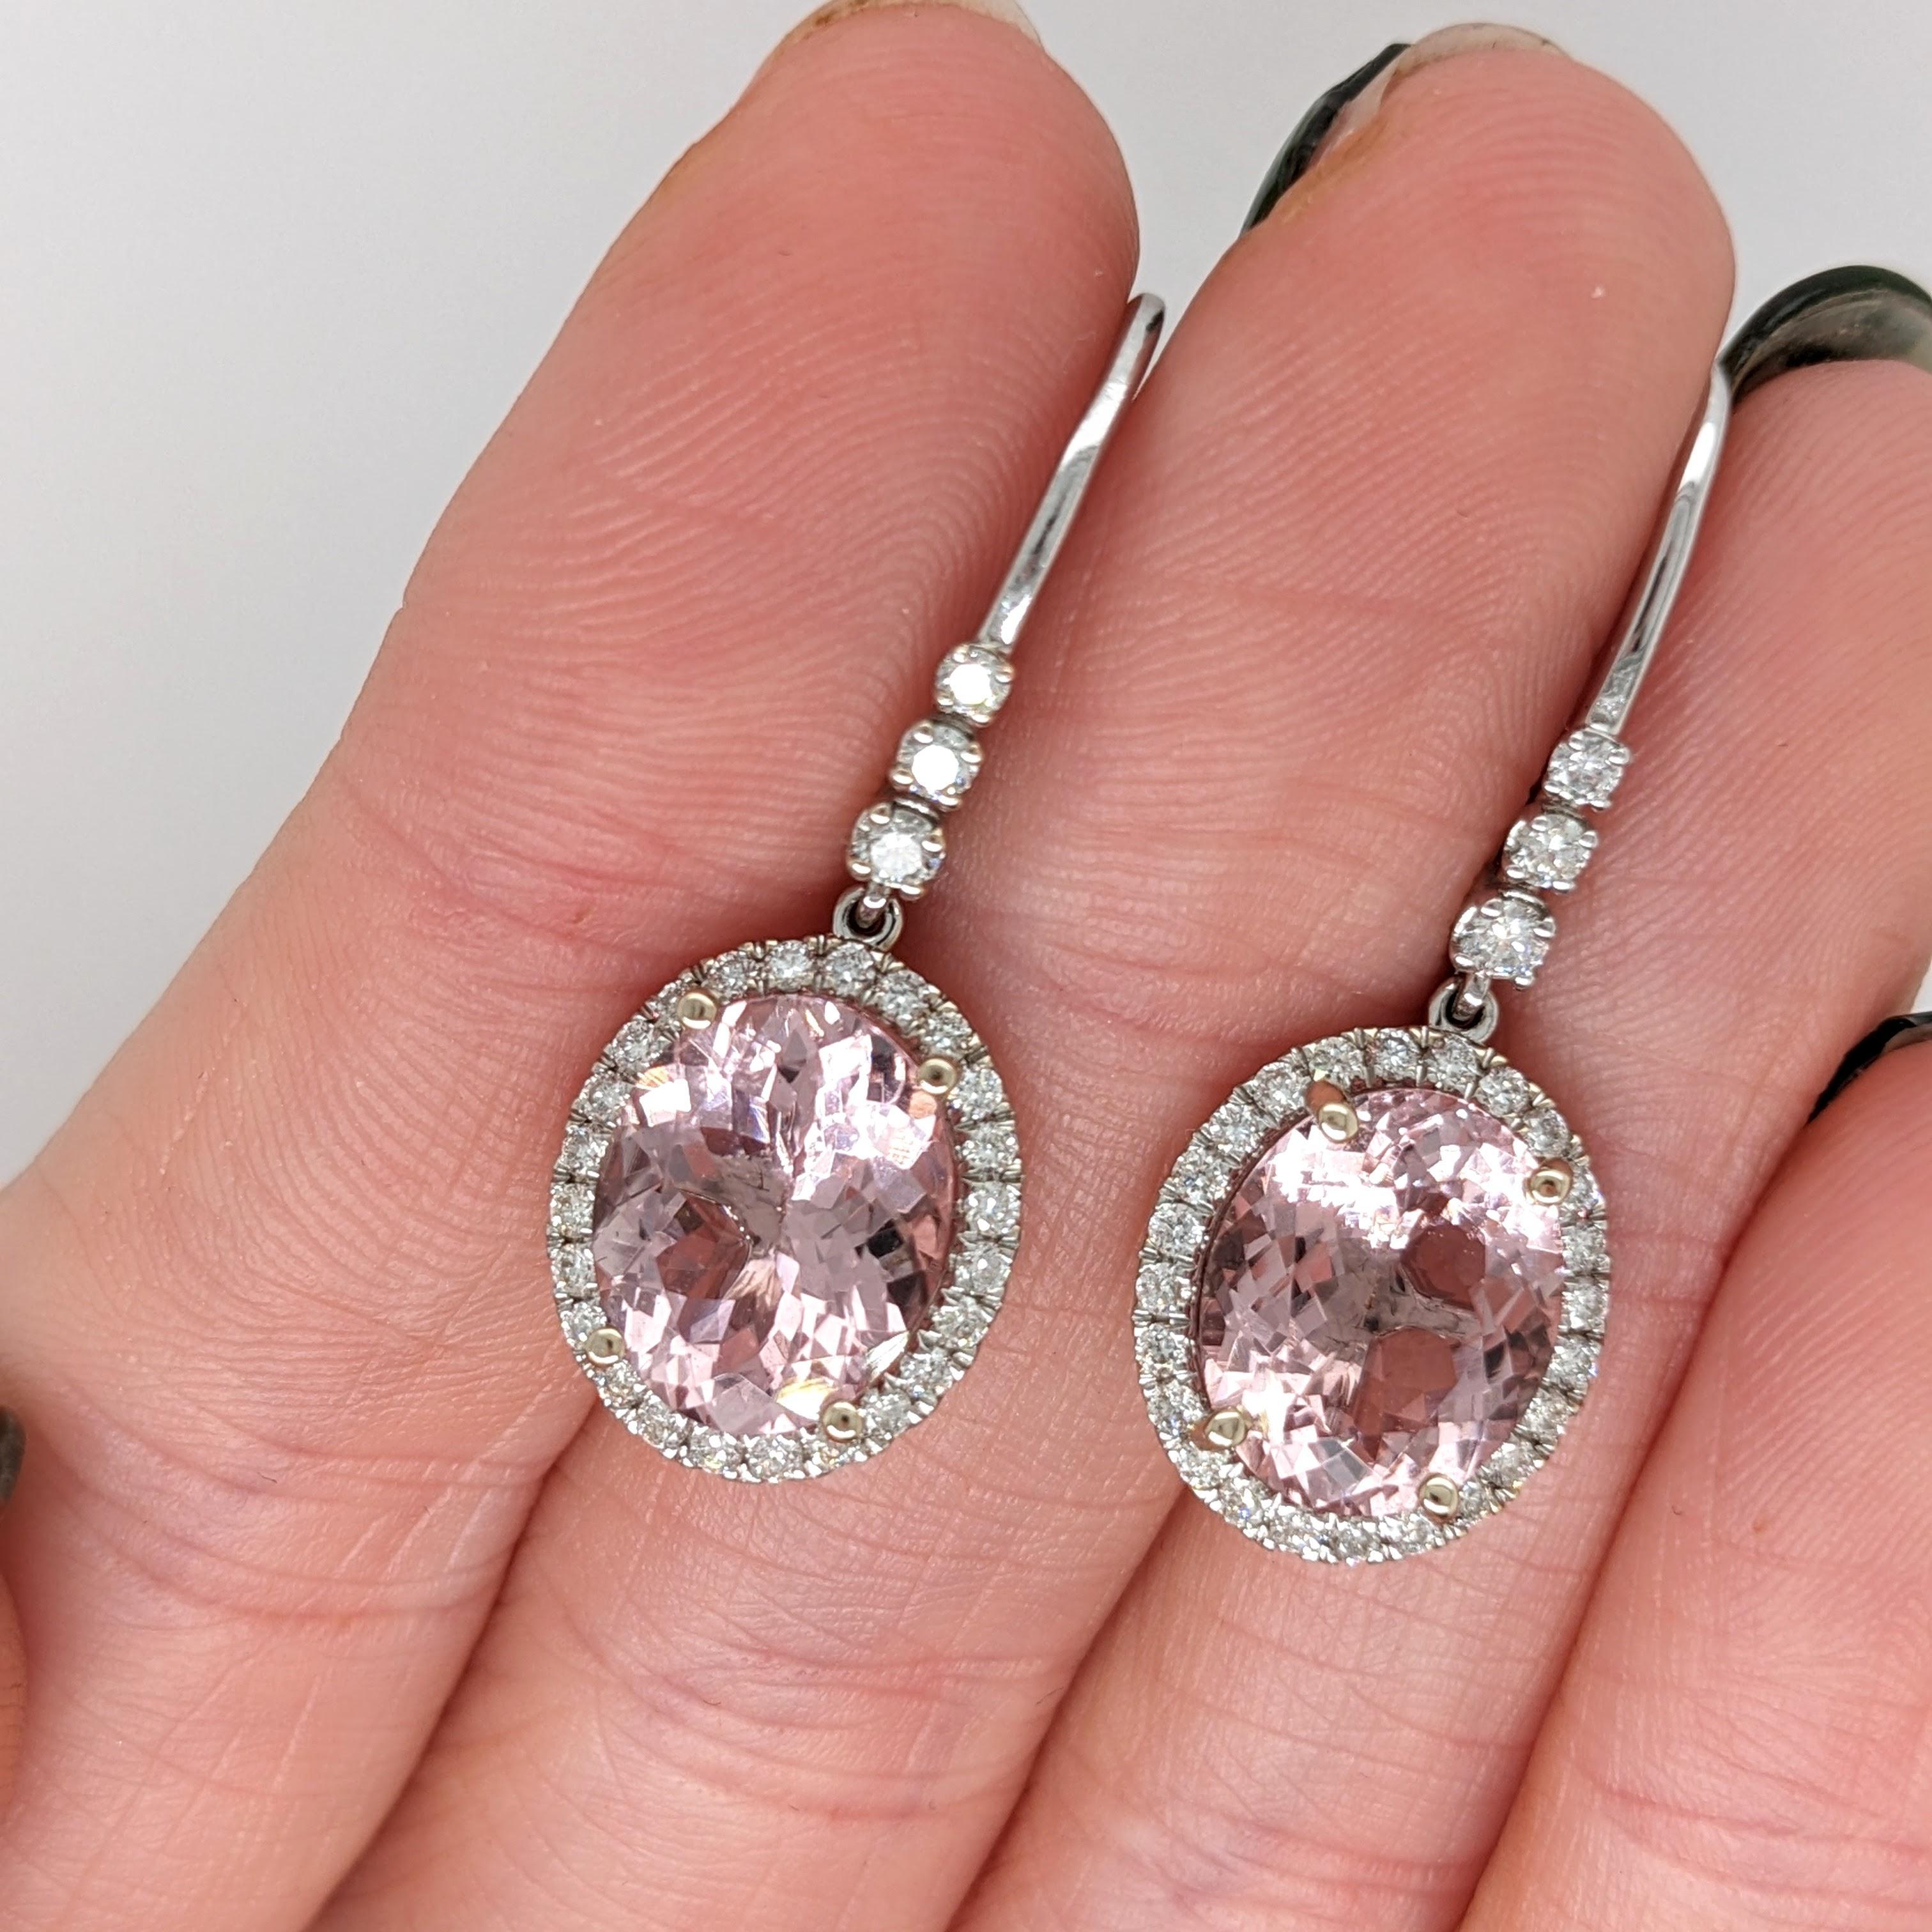 These beautiful drop earrings features two 6.13 cttw morganite oval gemstones with natural earth mined diamonds all set in solid 14k gold. 

Specifications

Item Type: Earrings
Center Stone: Morganite
Treatment: Heated
Weight: 2/6.13 cttw
Head